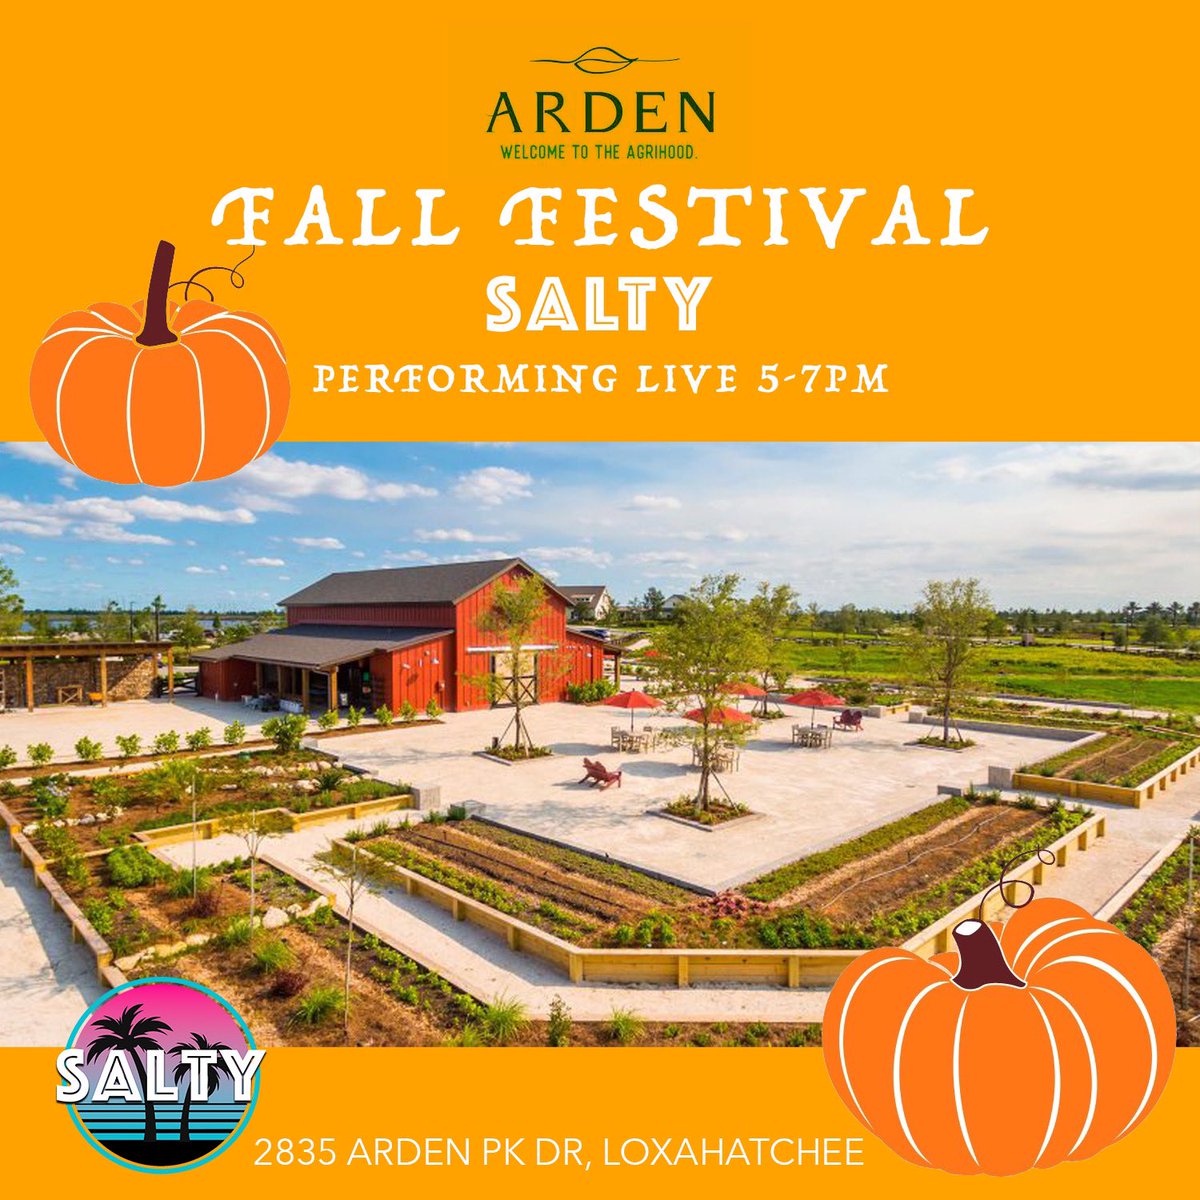 Fall is here! 🍁🍂🎃Time to celebrate!
SALTY performing at Arden Agrihood
pumpkin patch * corn maze * food trucks 

.
.
#saltlife #paradise #leekalt #sunsetmusic #livemusic #livemusicalperformance #salty #chilloutmusic #chillout #satrinxa #indie #electronica #yachtrock #xandrak